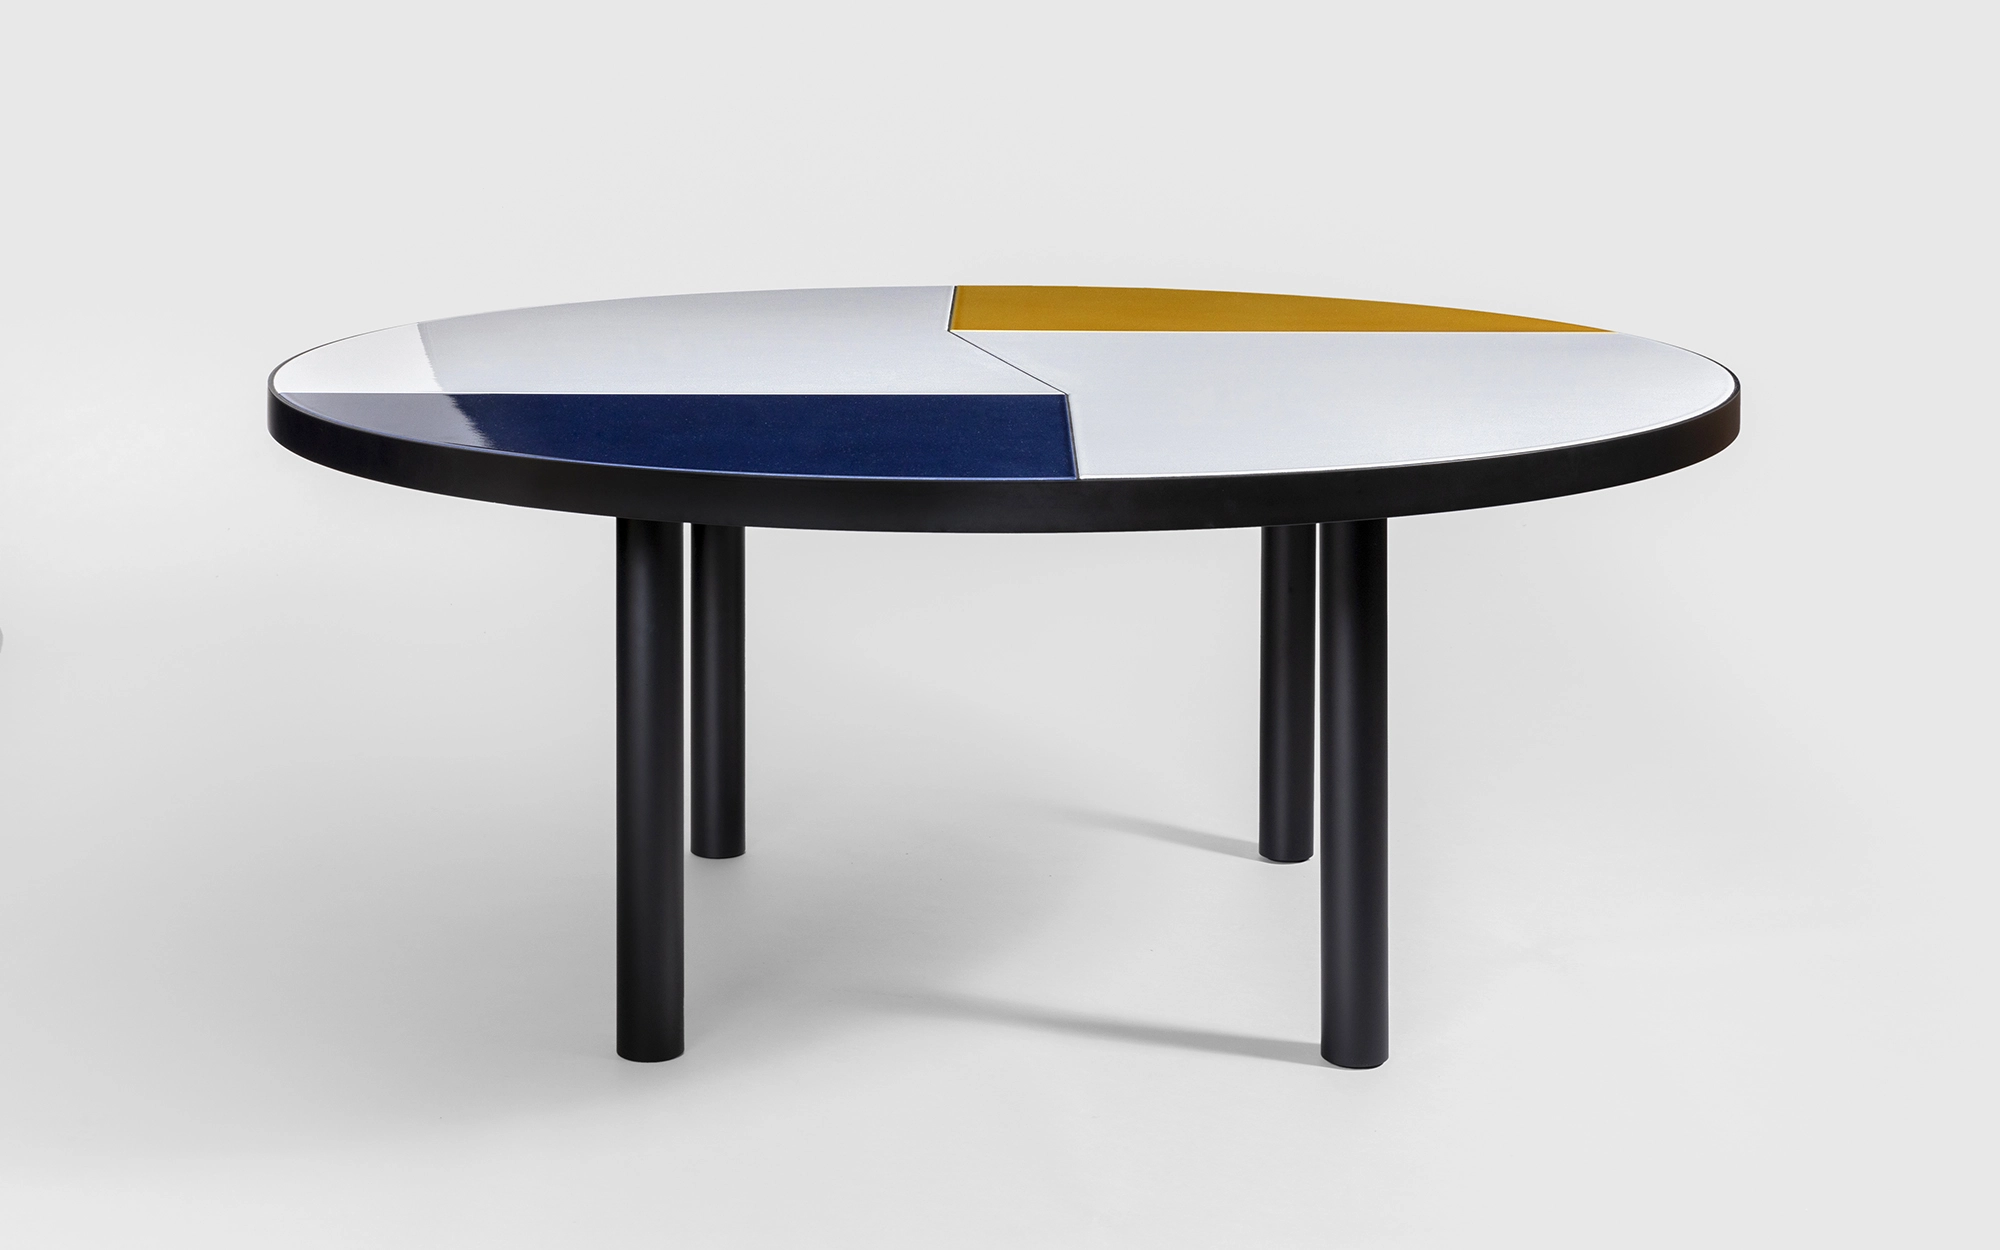 Fraction Dining Table - Pierre Charpin - Mirror - Galerie kreo